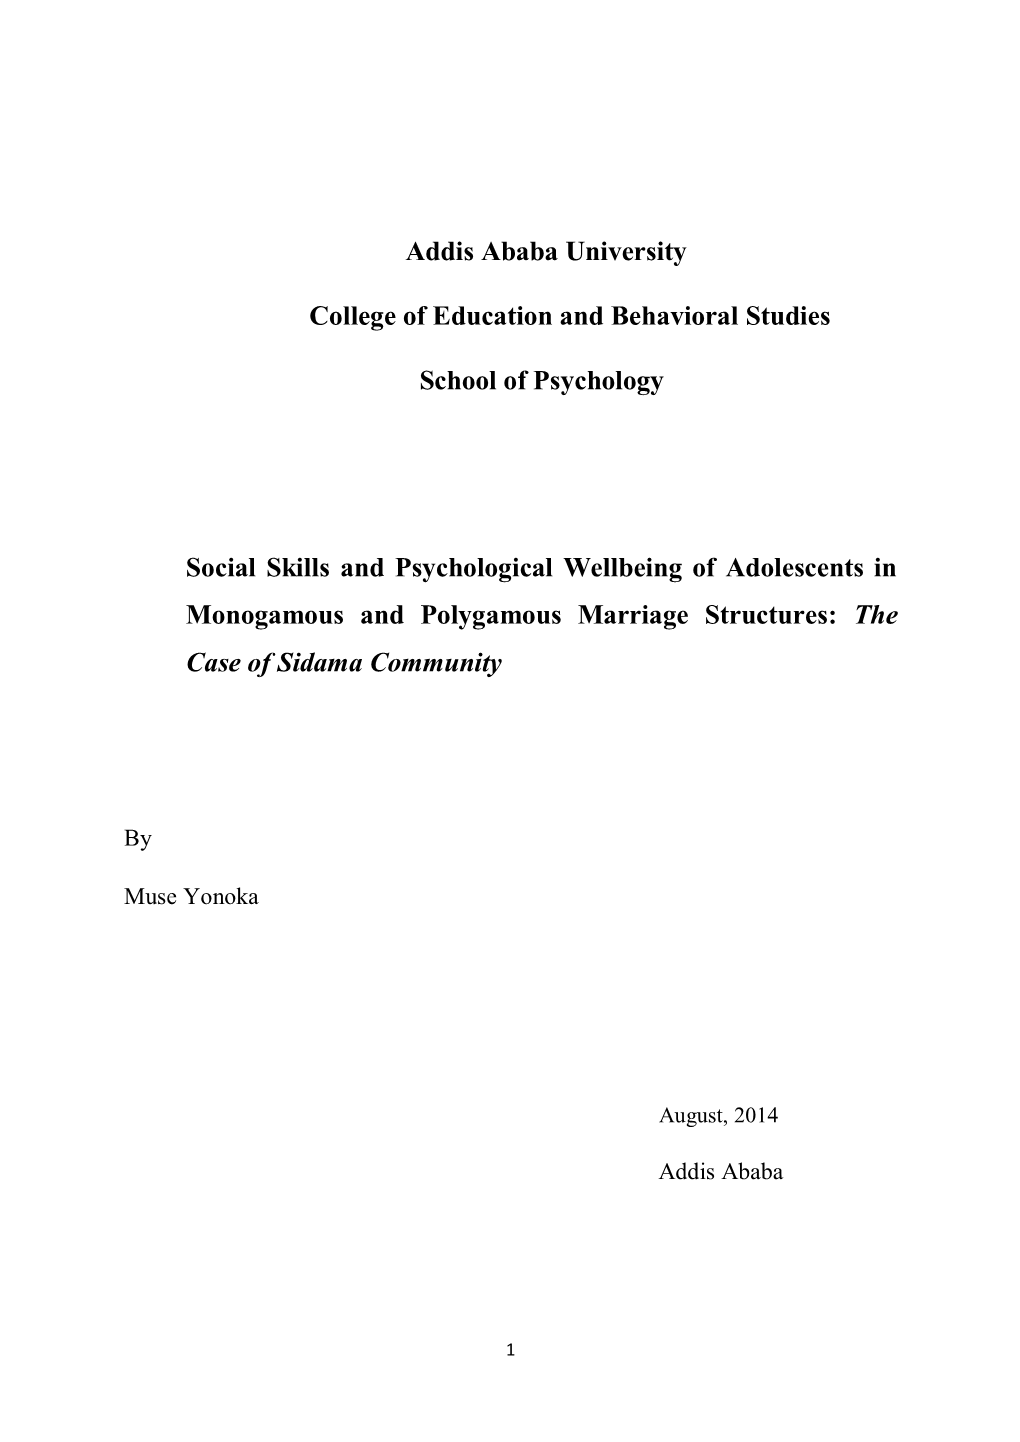 Addis Ababa University College of Education and Behavioral Studies